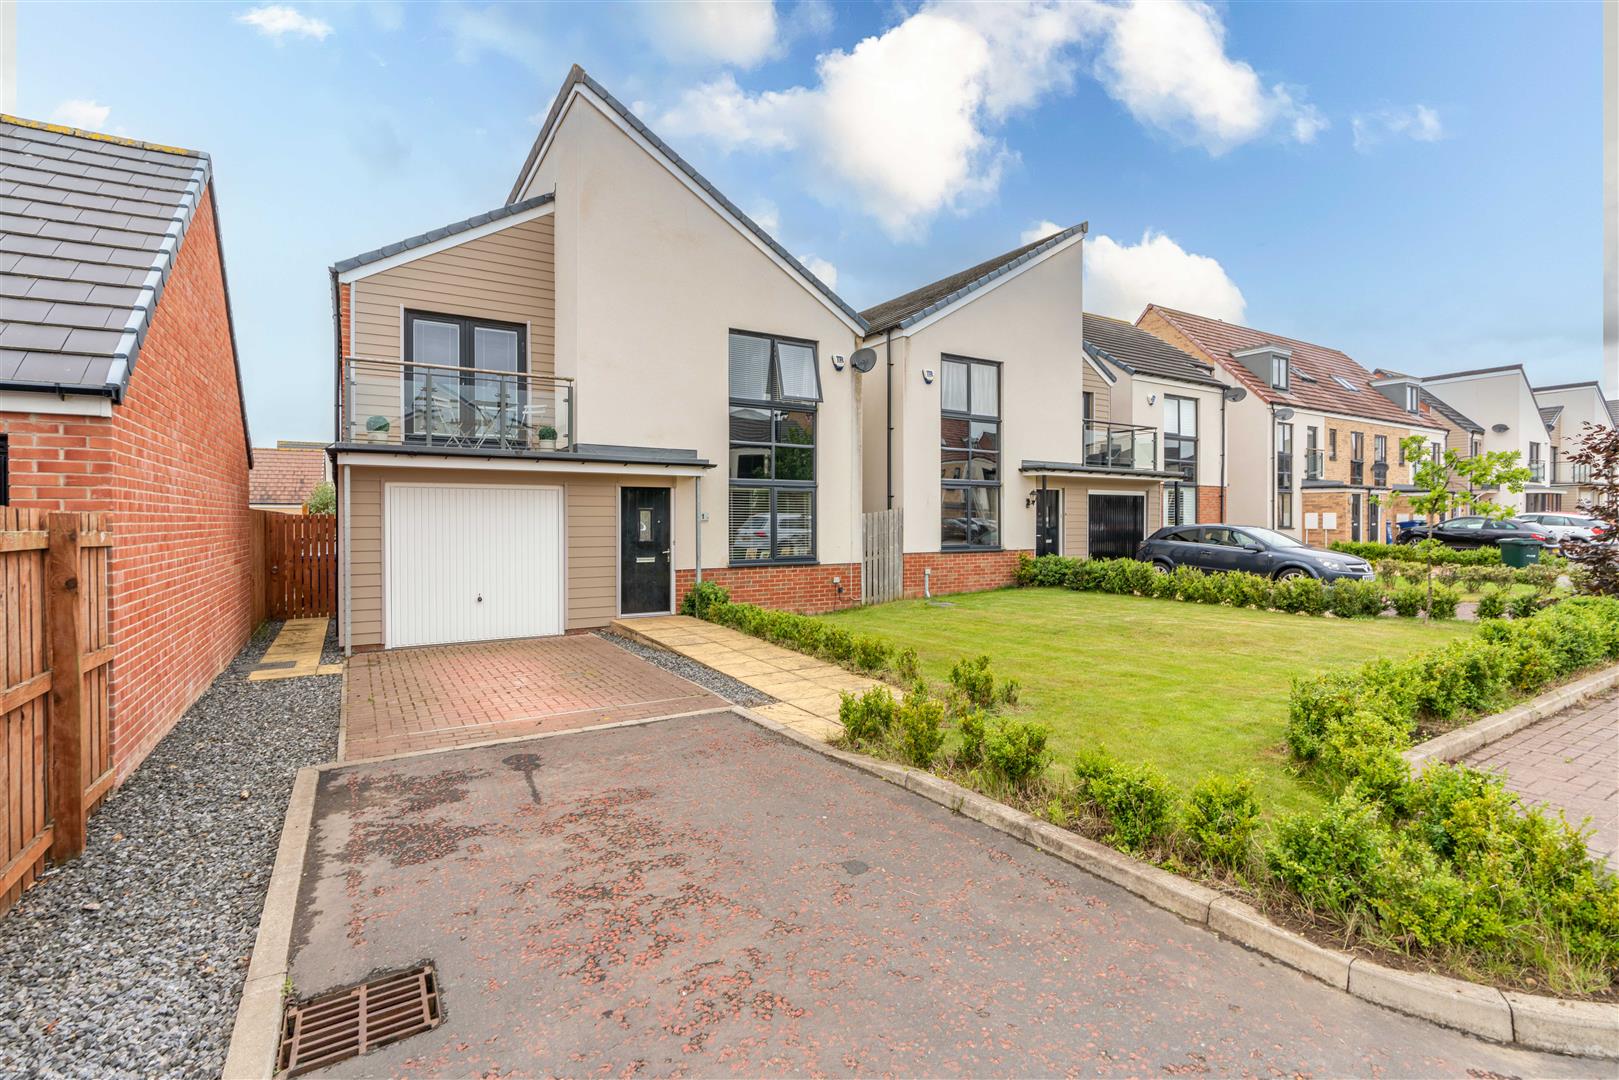 4 bed detached house for sale in Iveston Avenue, Great Park, NE13